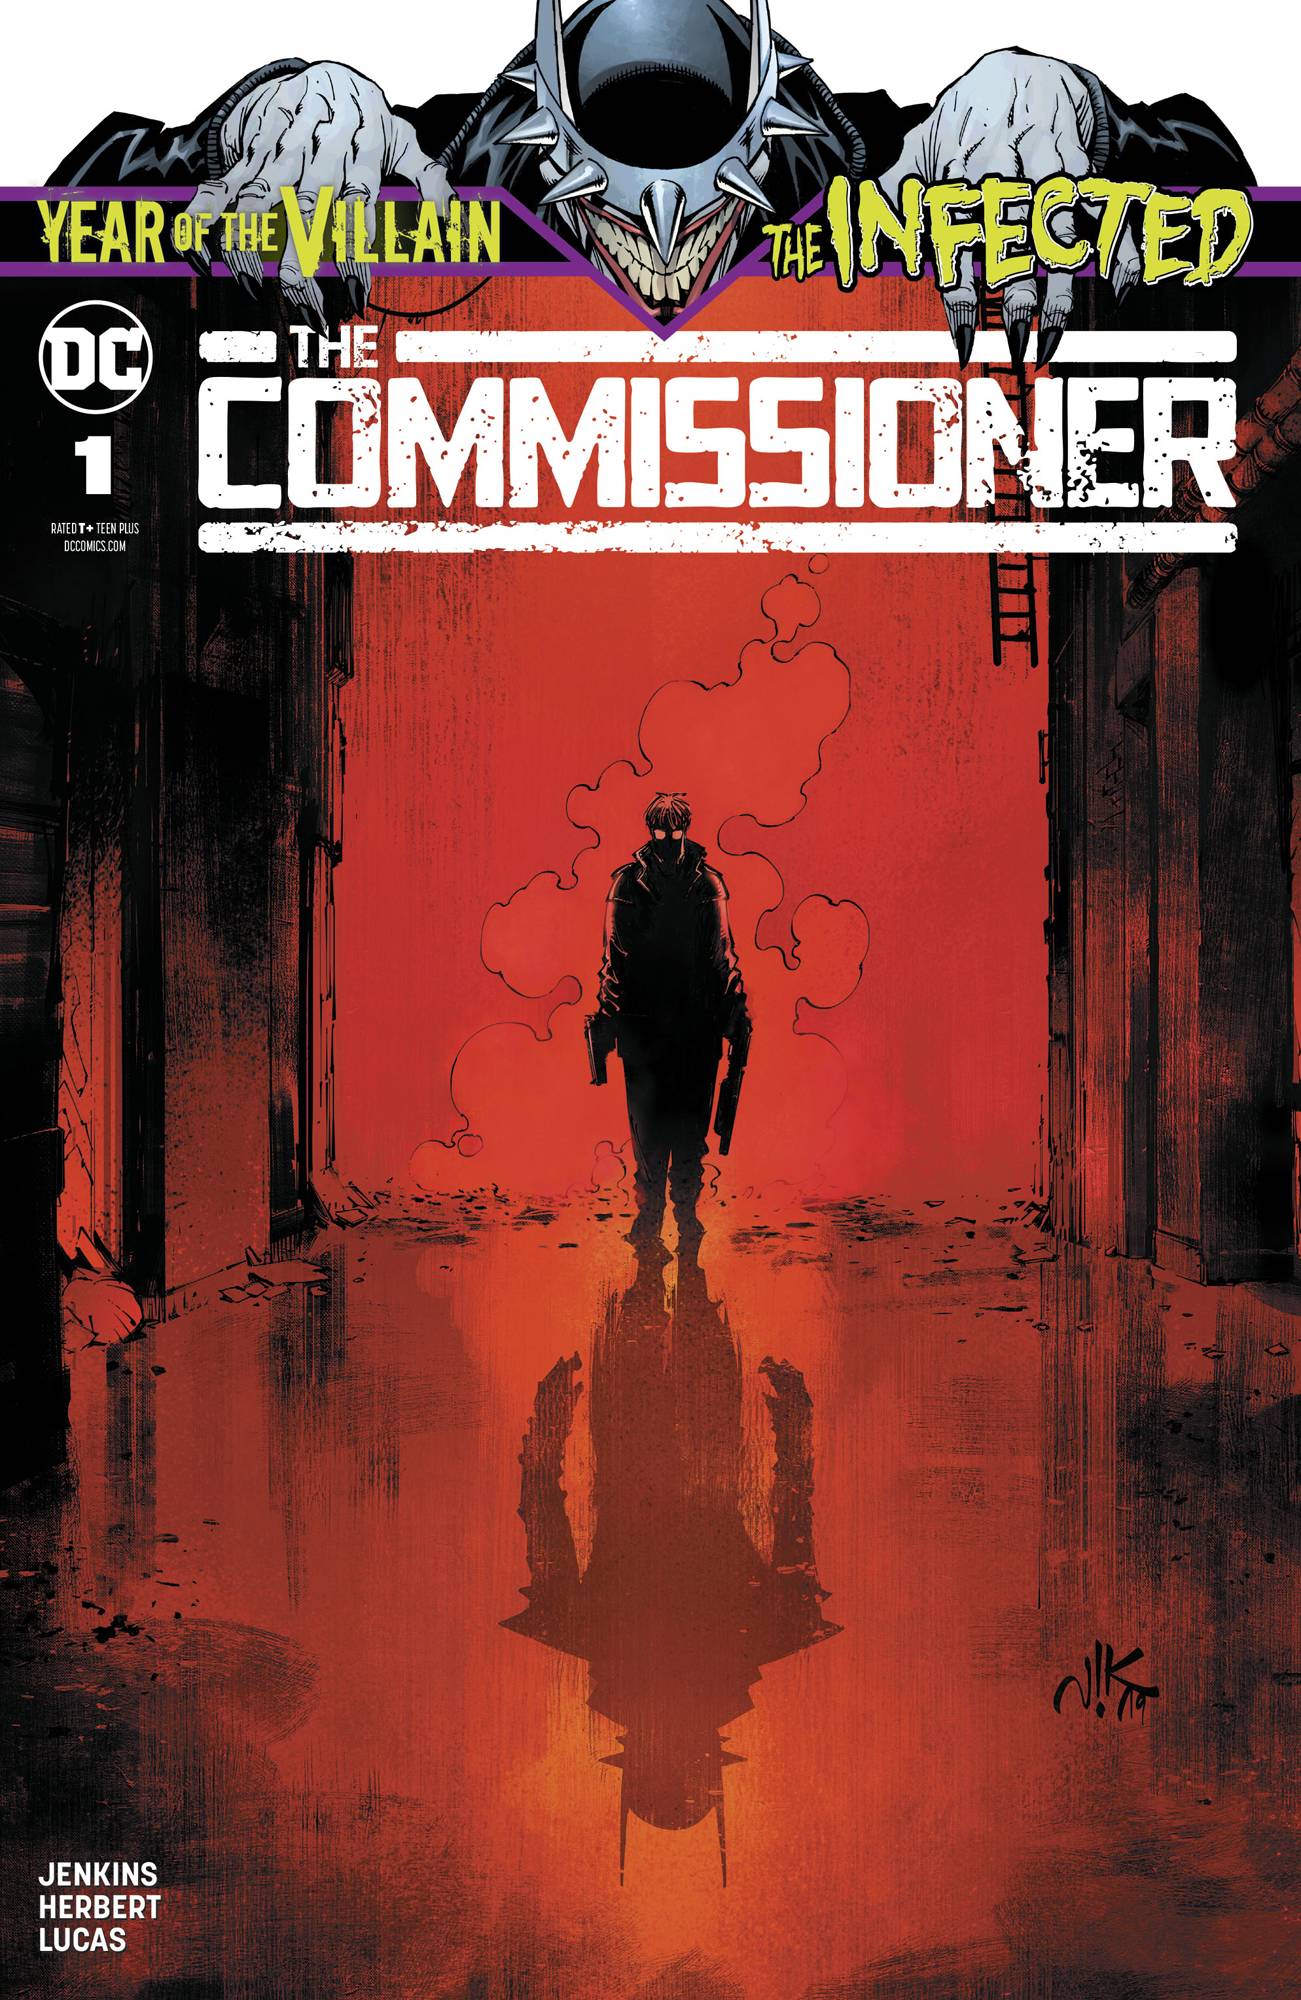 INFECTED THE COMMISSIONER #1